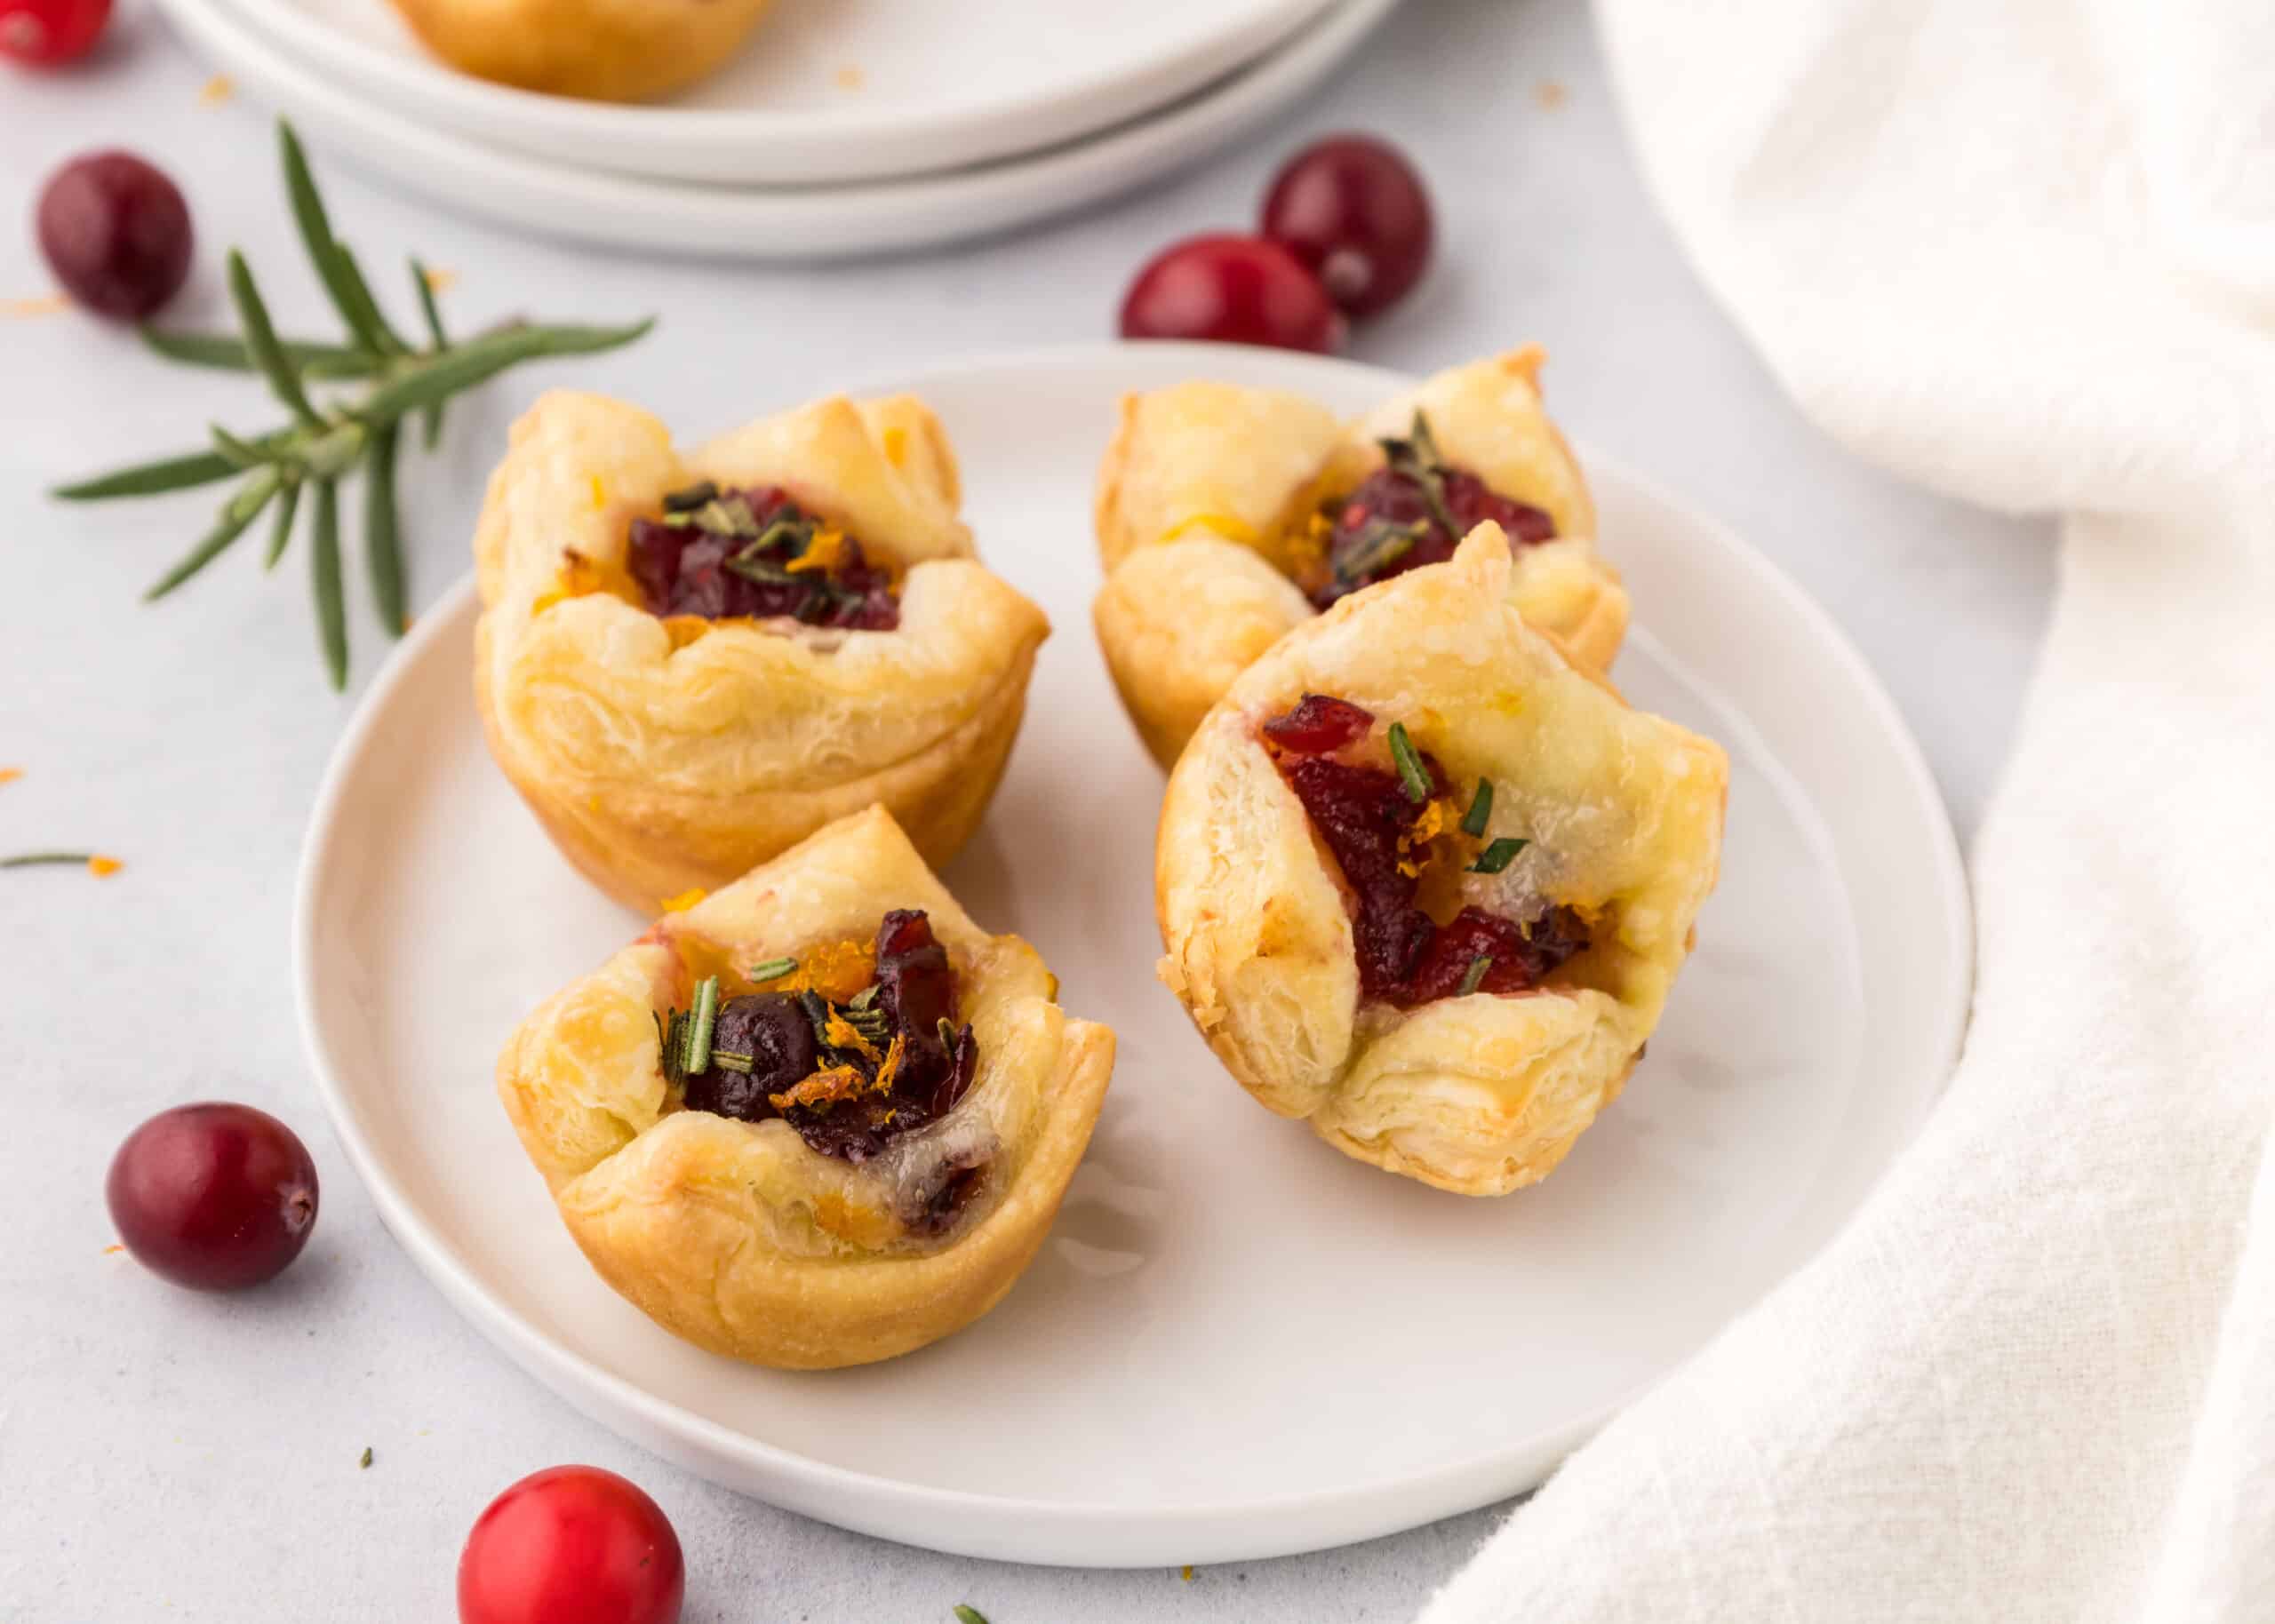 Rosemary, Cranberry, and Camembert Bites (baked Camembert with cranberries appetizers)